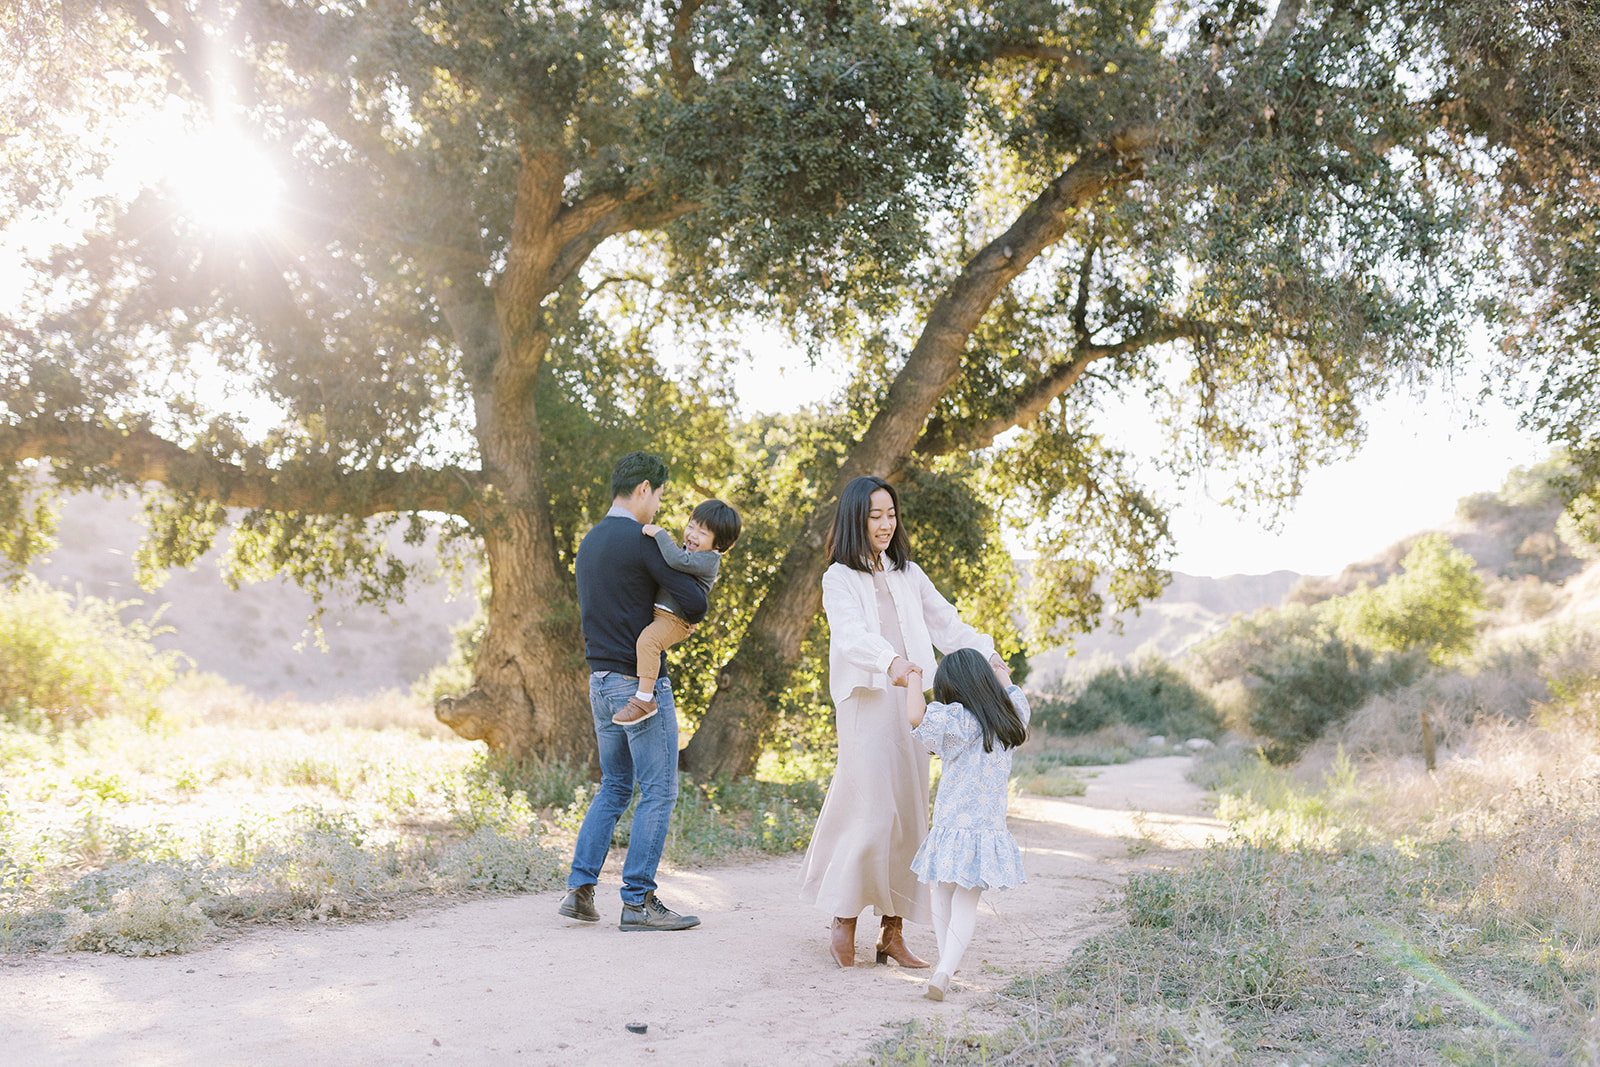 Family with two young children dancing and playing together on a dirt path with a large oak tree behind them.